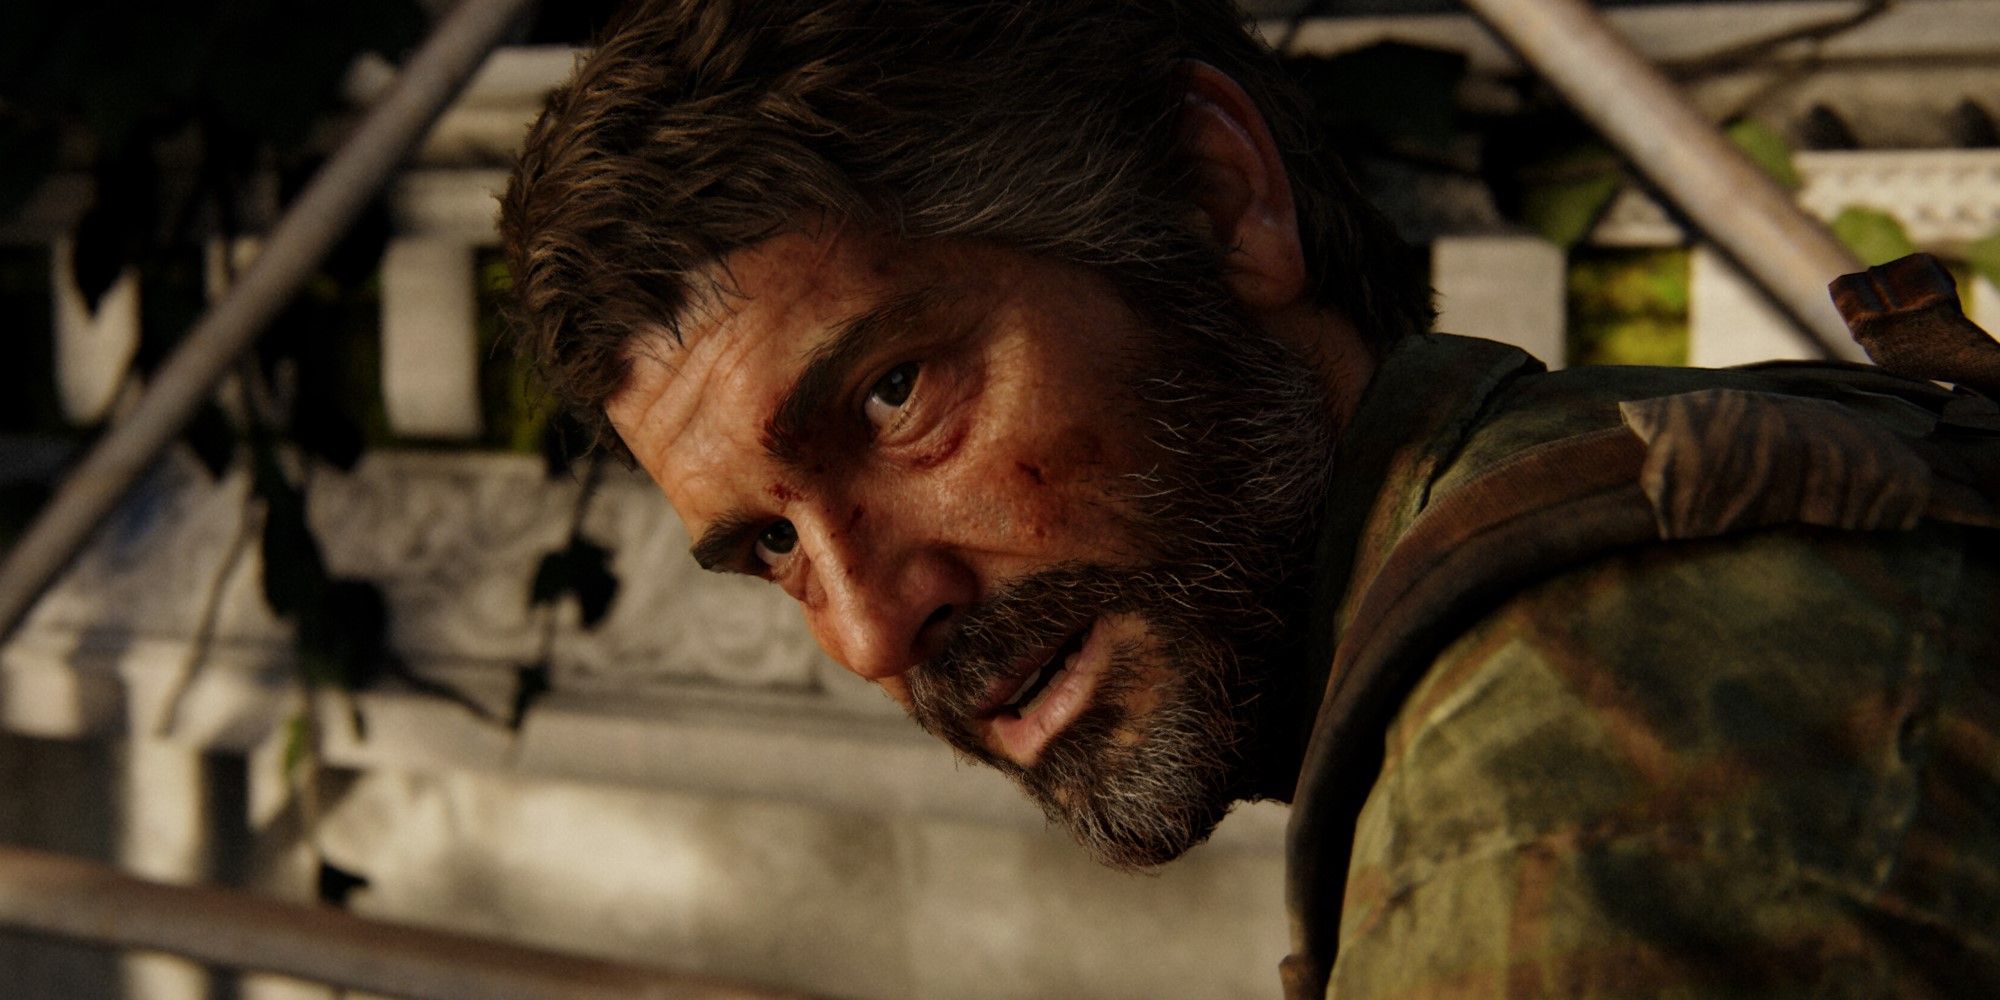 Troy Baker Wants to Be In The Last of Us TV Show But Not as Joel